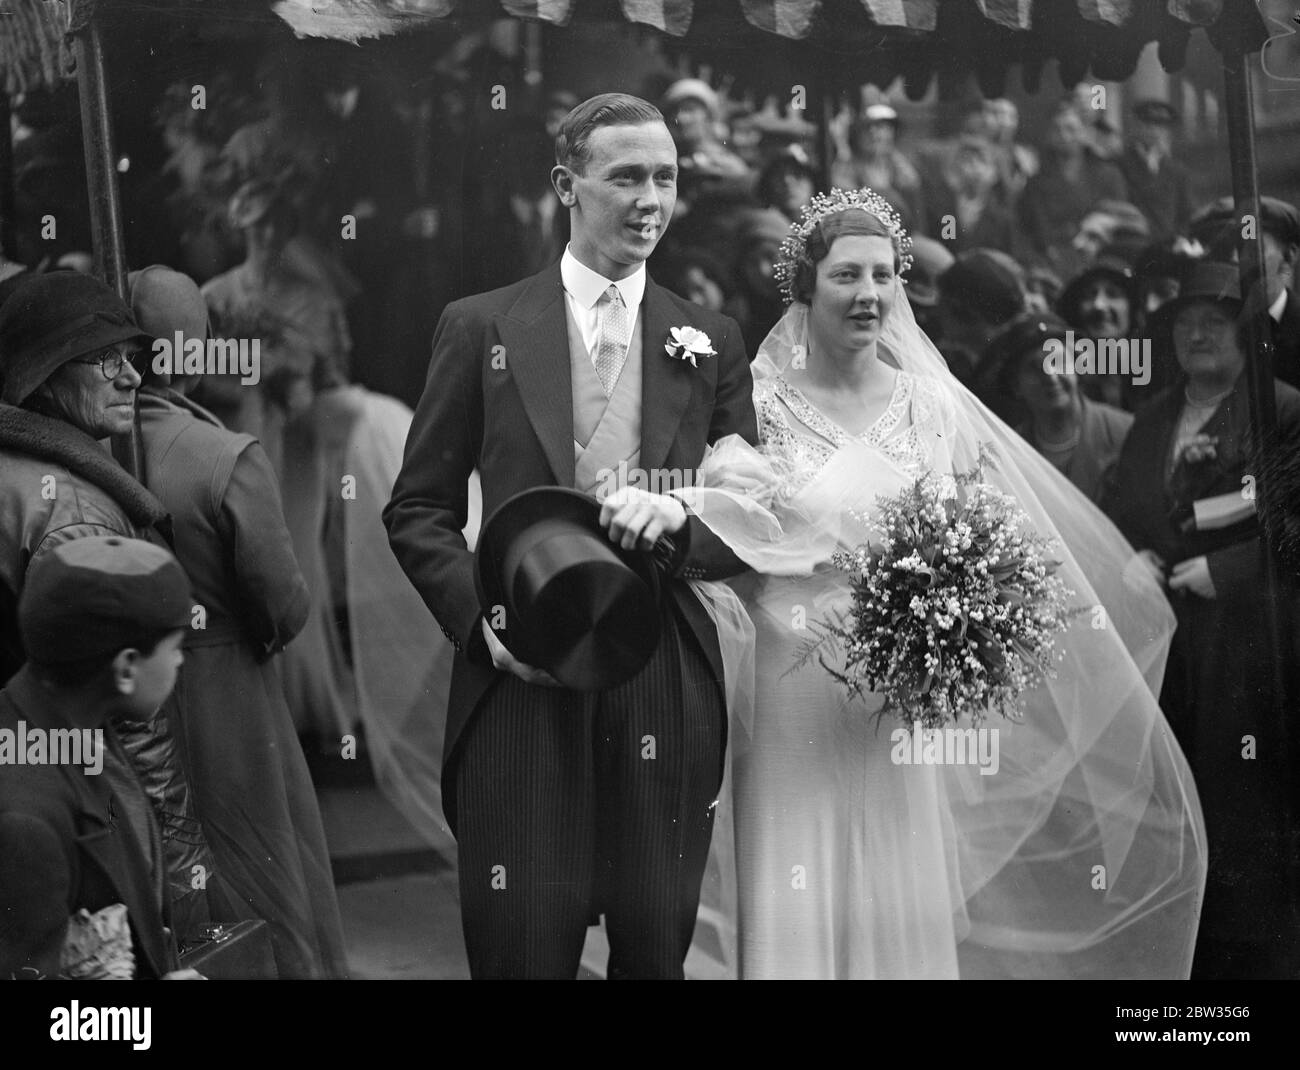 Blackheath ' s next rugby captain weds . A G Cridlan , the Oxford Blue and next season ' s captain of Blackheath Rugby Club was married at All Souls ' Church , Langham Place , London . Many Rugby enthusiasts attended . The bride and groom leaving the church after the ceremony . 27 April 1933 Stock Photo